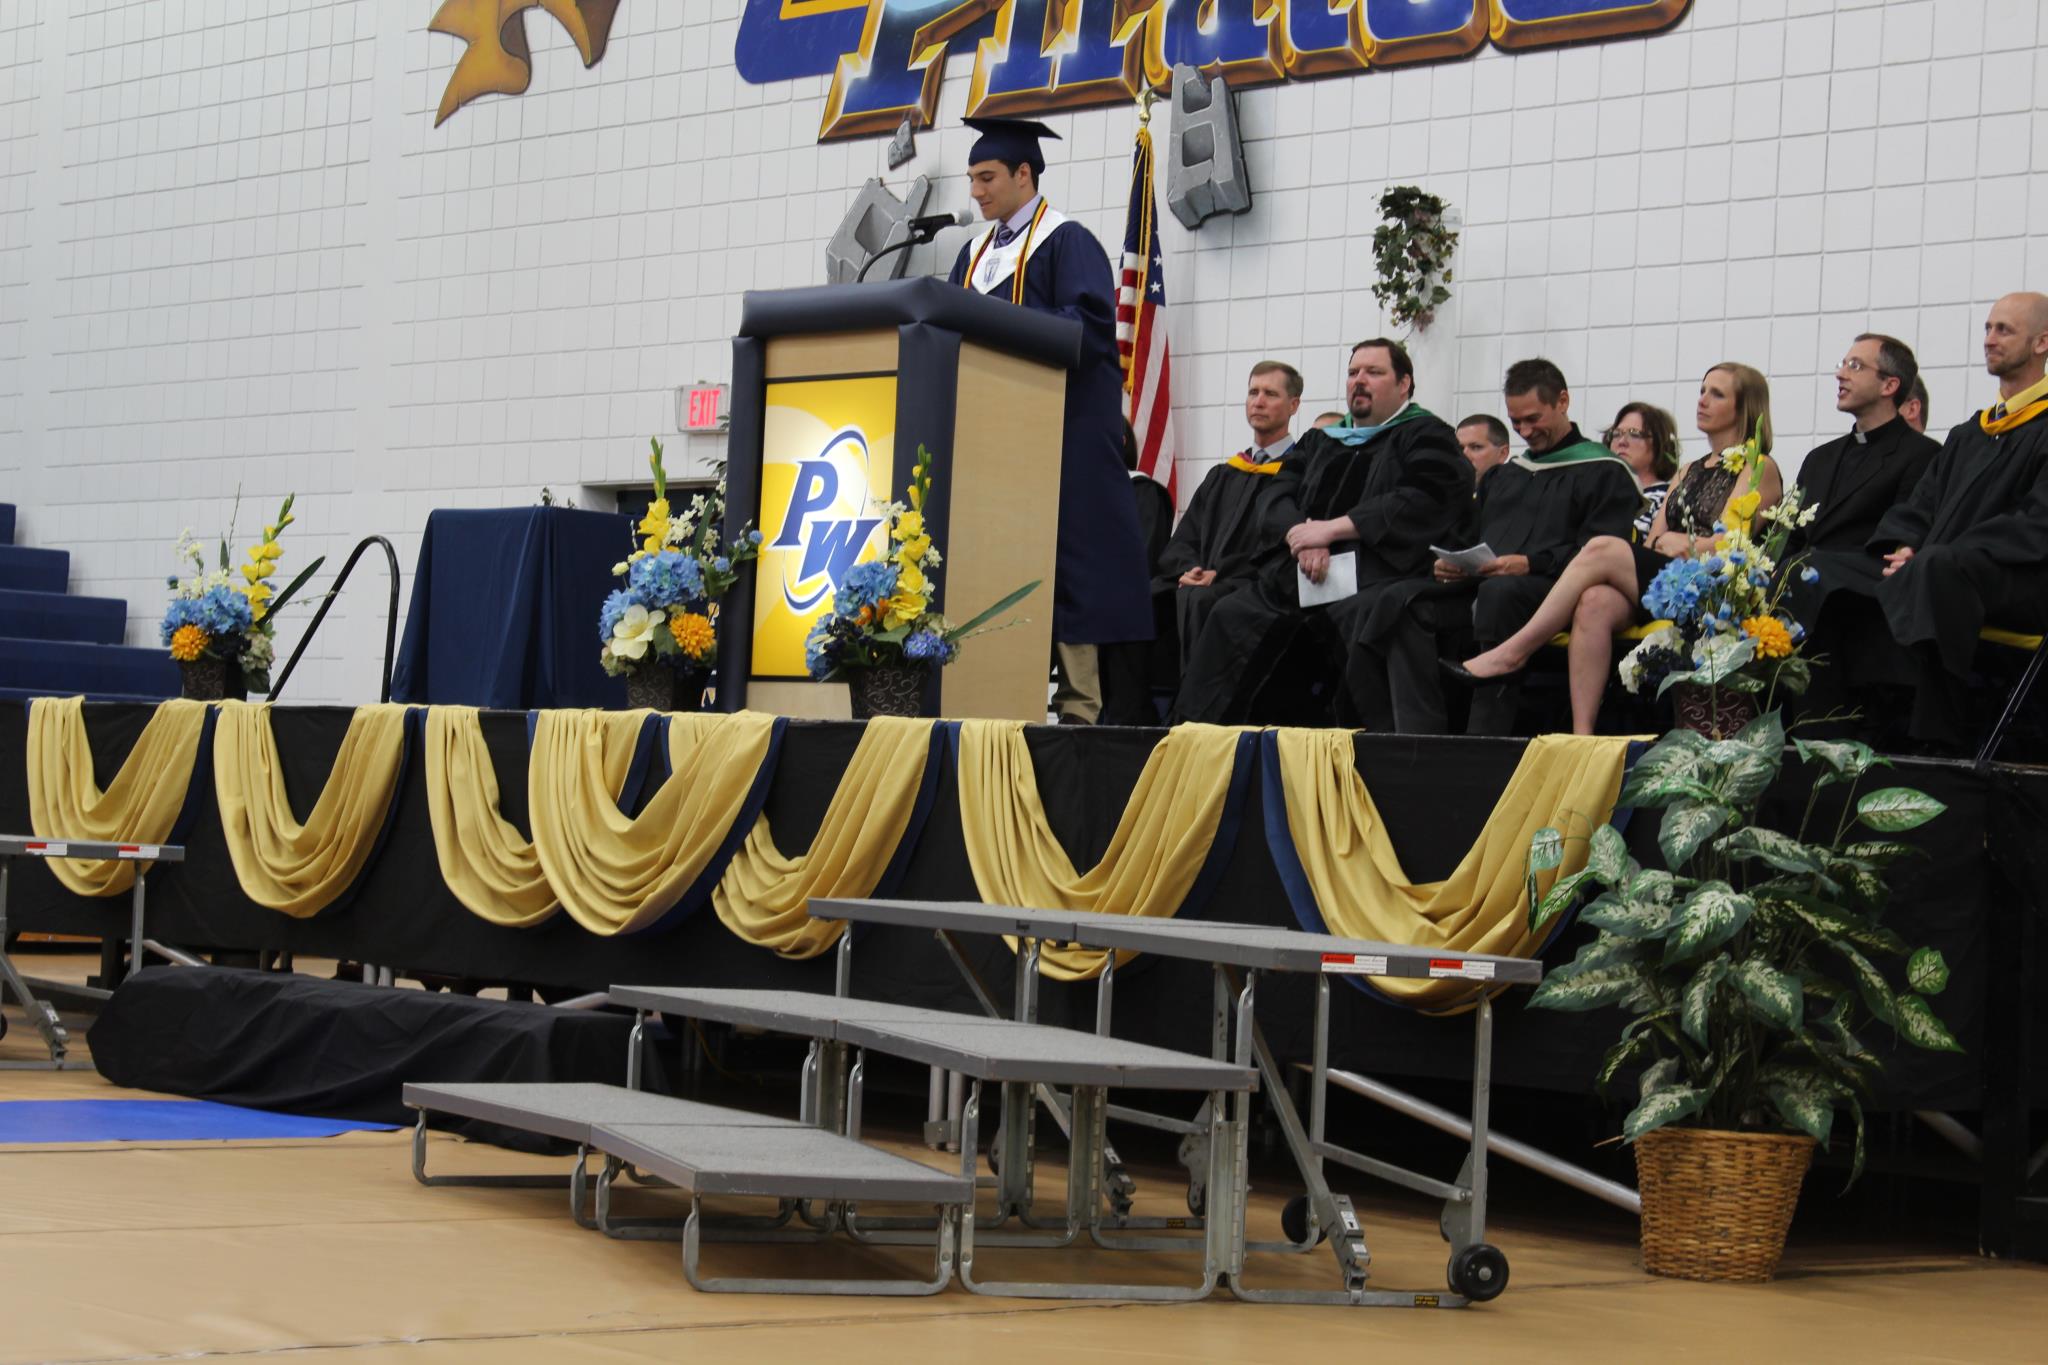 PW graduate, Trevor Thelen, delivers a speech at Commencement on May 21, 2017.